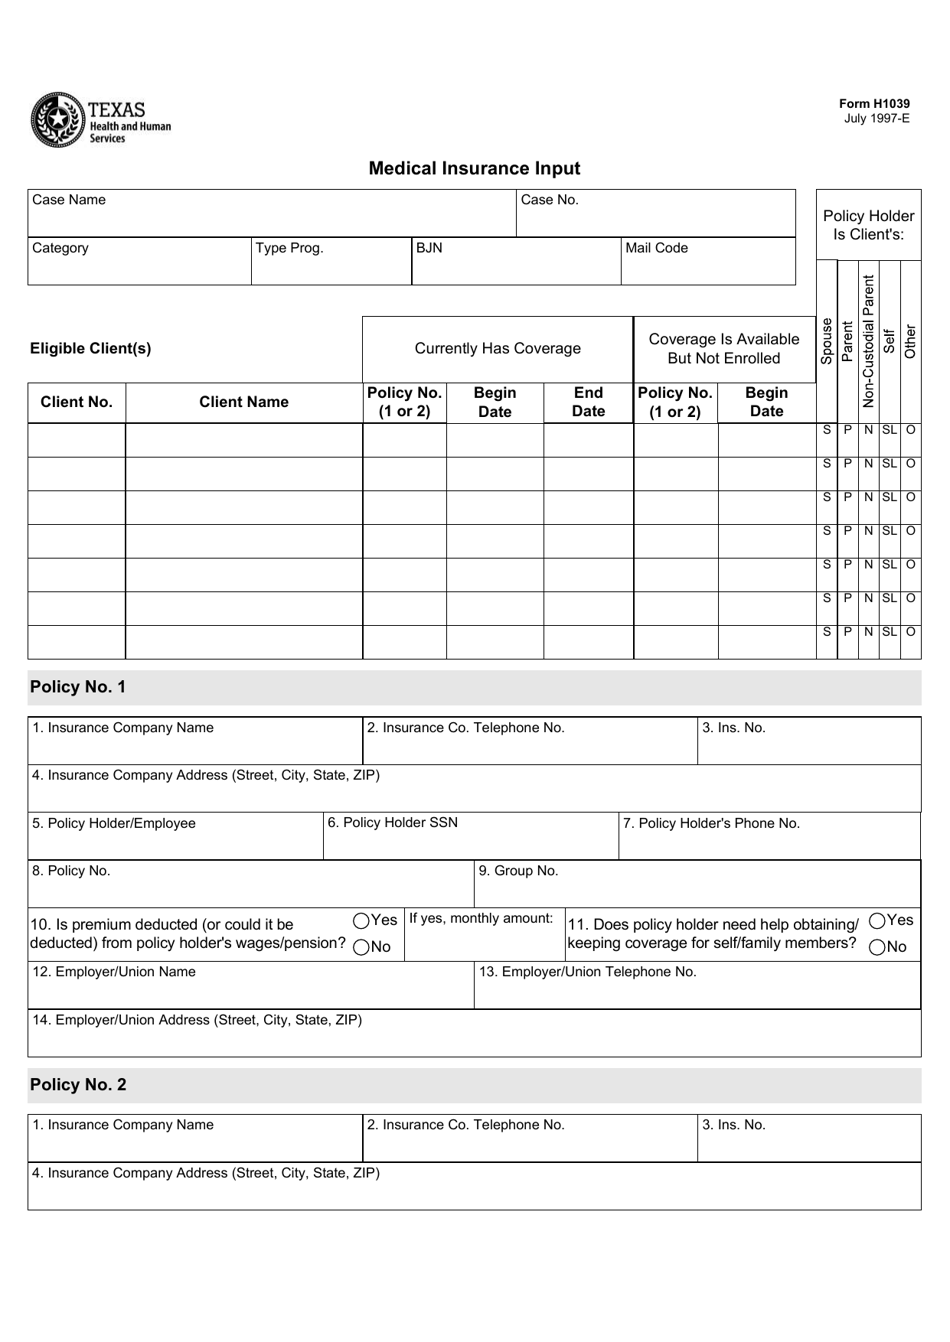 Form H1039 Medical Insurance Input - Texas, Page 1